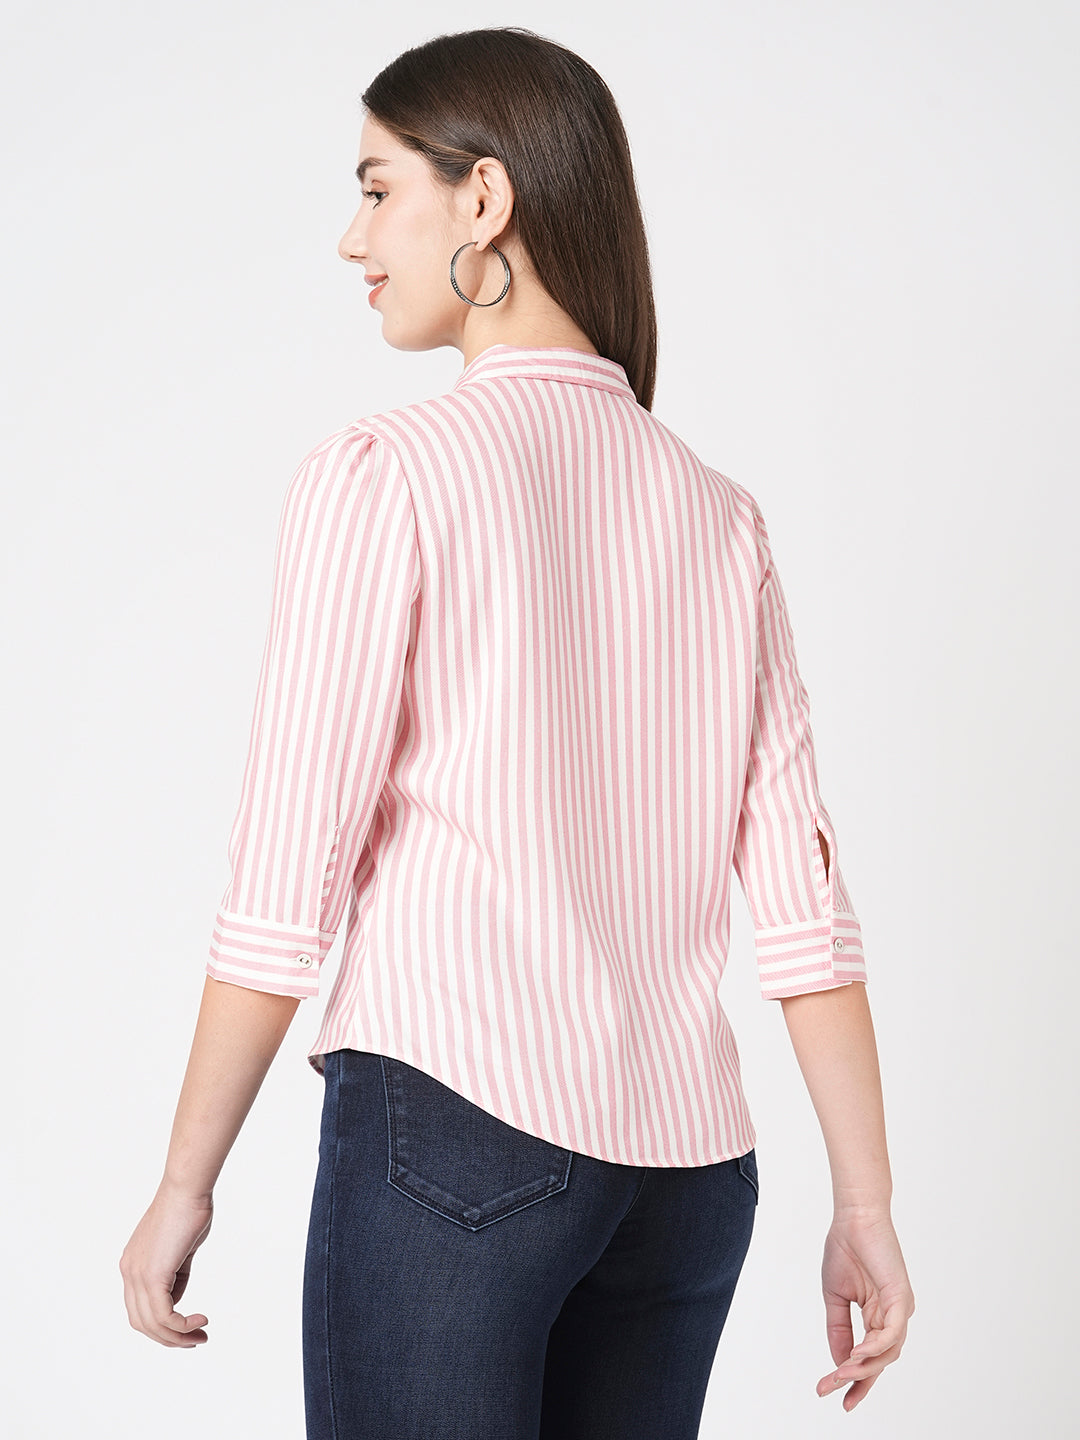 Striped Slim Fit Curved Spread Collar Casual Shirt